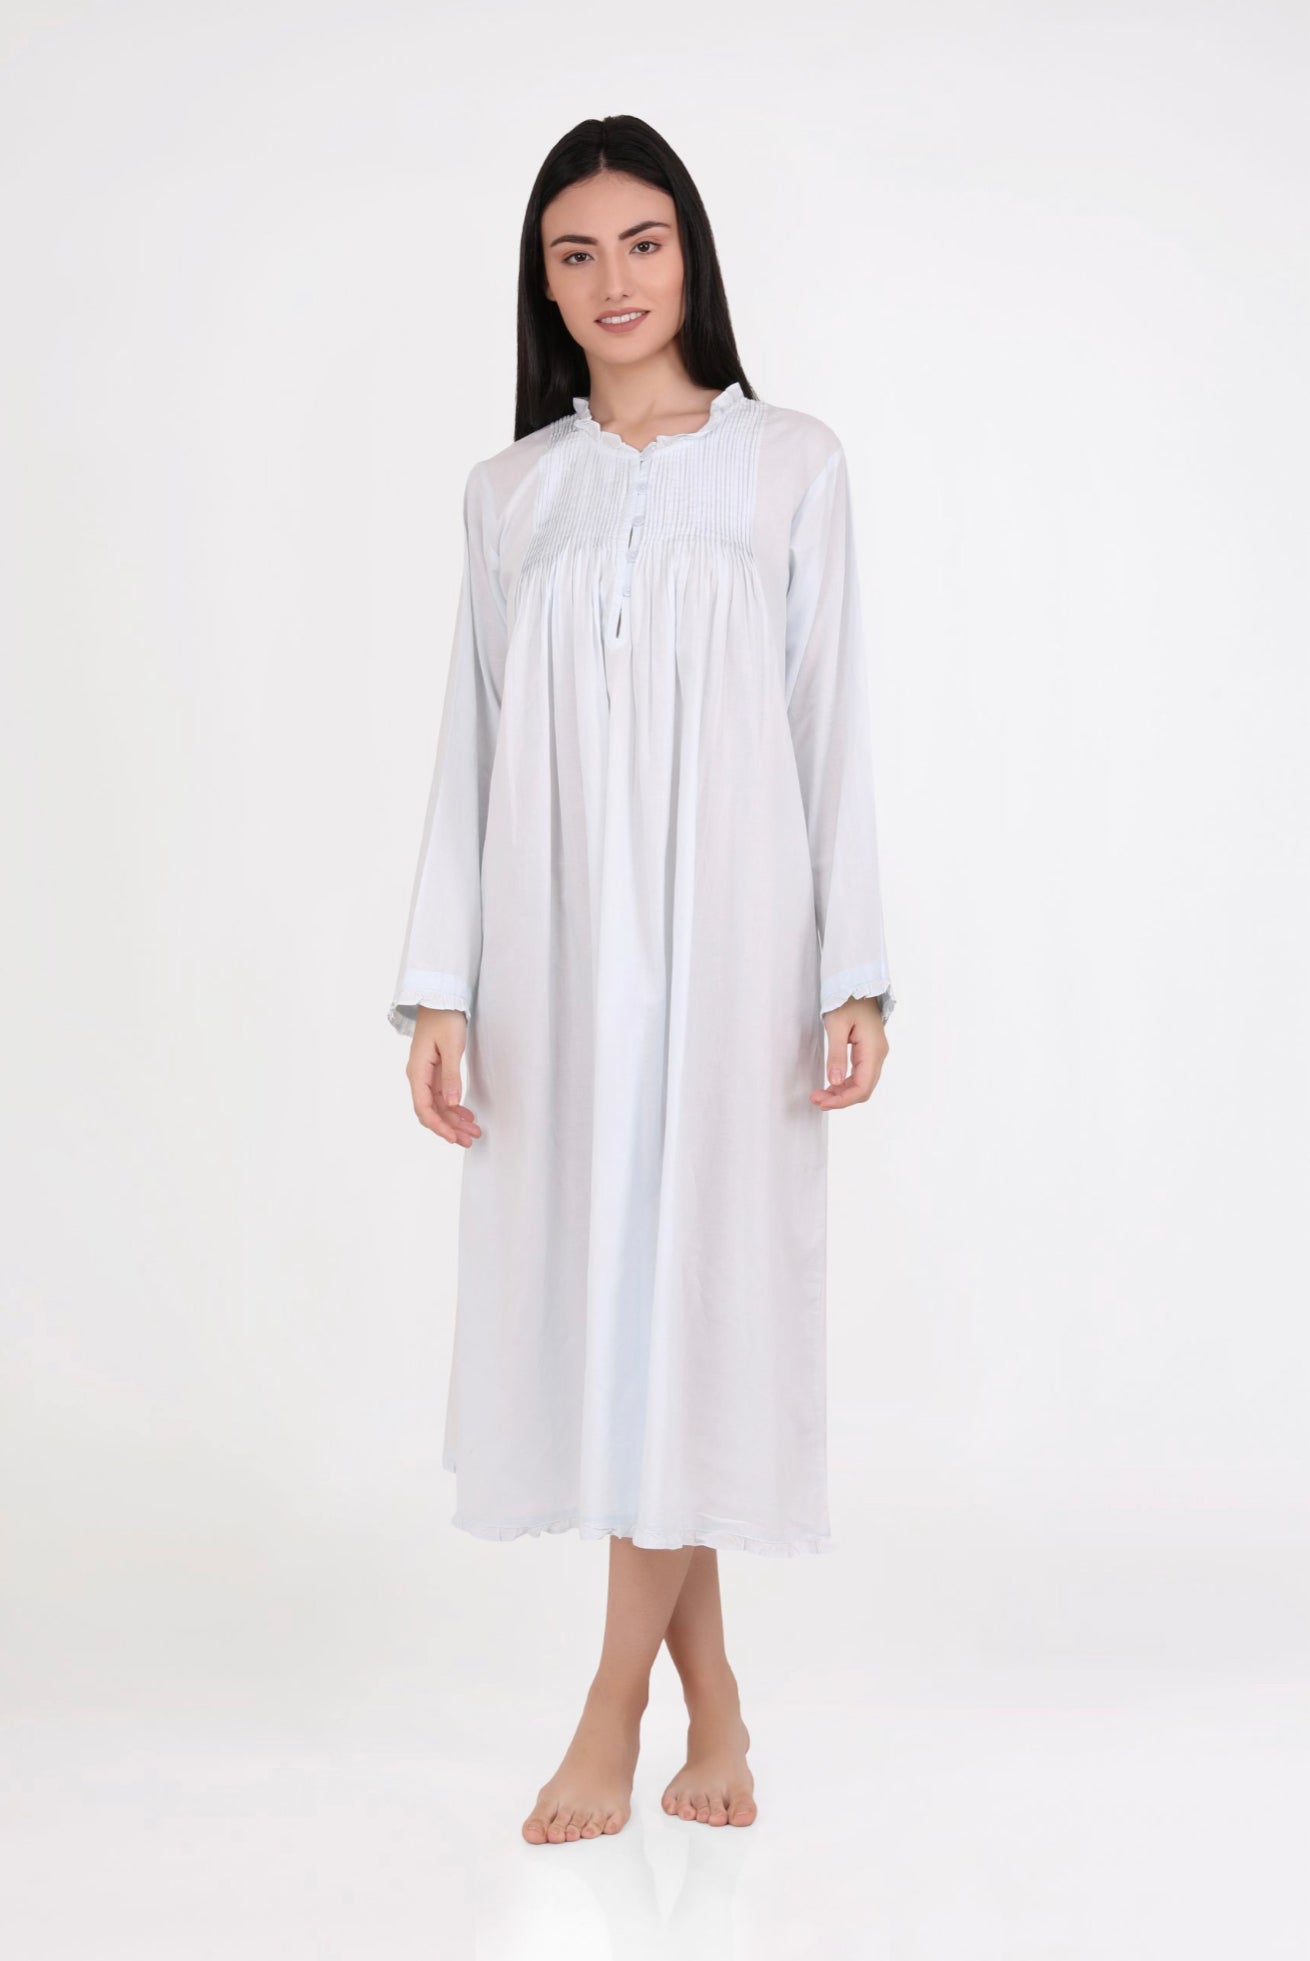 Arabella Blue Long Sleeve Nightie Eclectopia Gifts and Specialty Homewares 